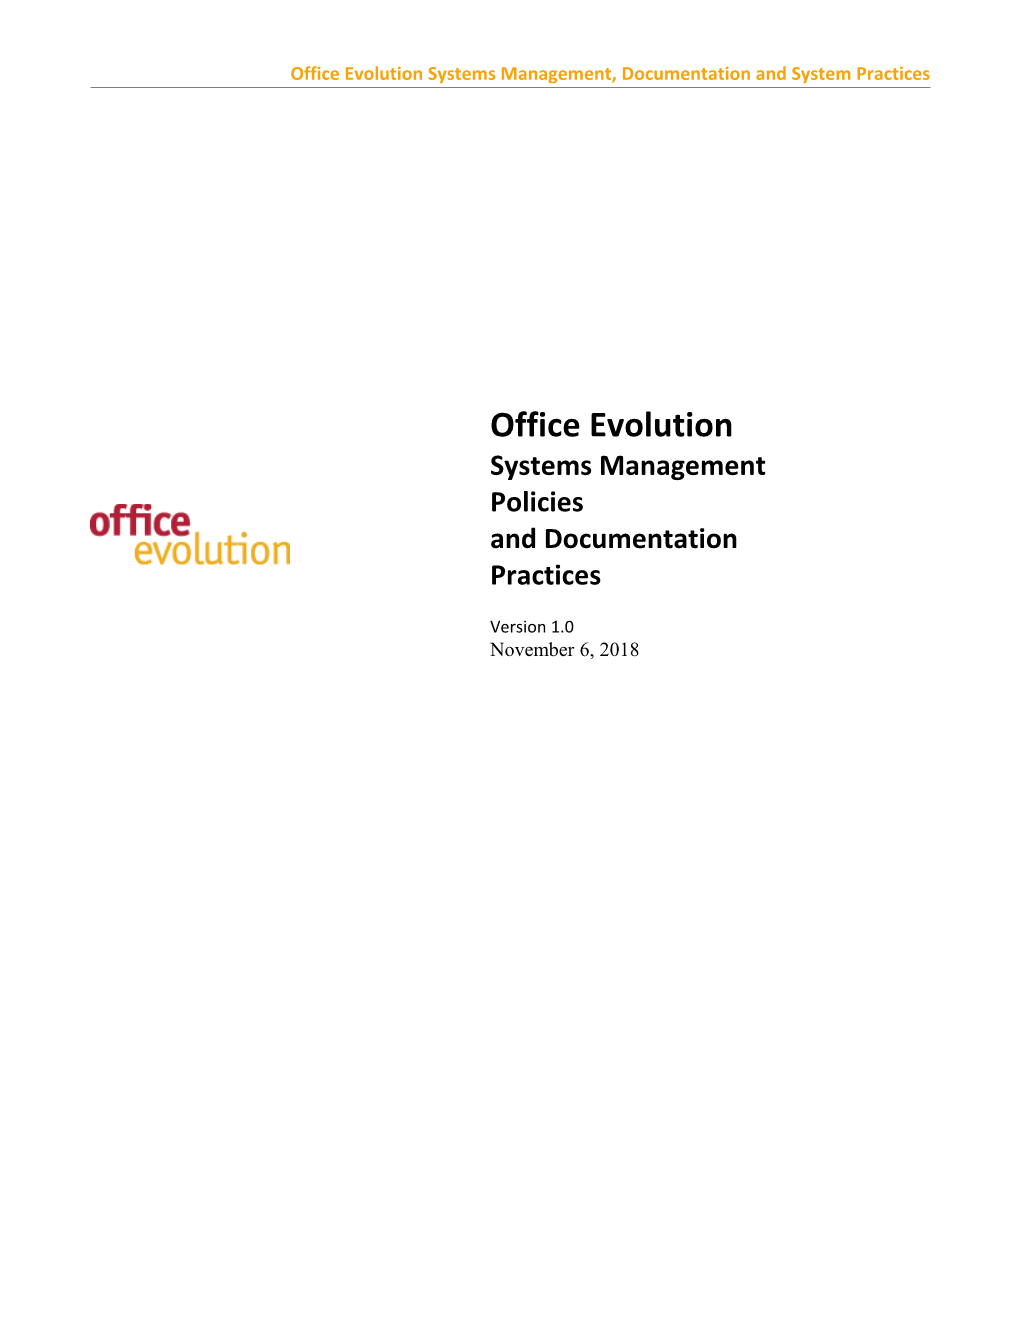 Office Evolution Systems Management, Documentation and System Practices